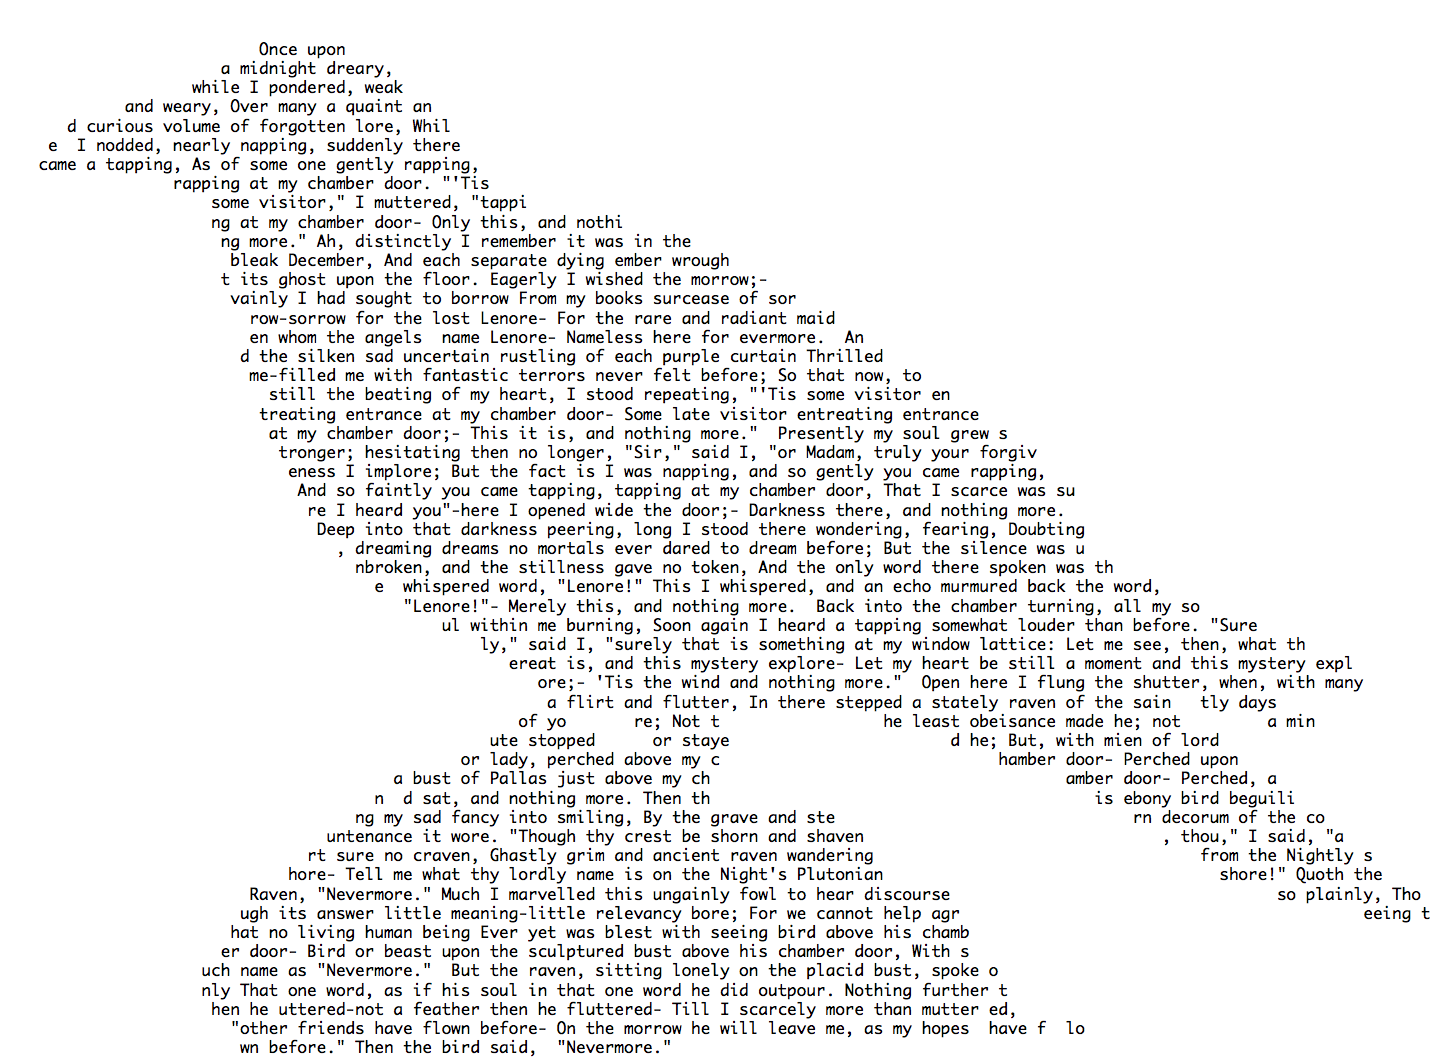 animal copy and paste text art